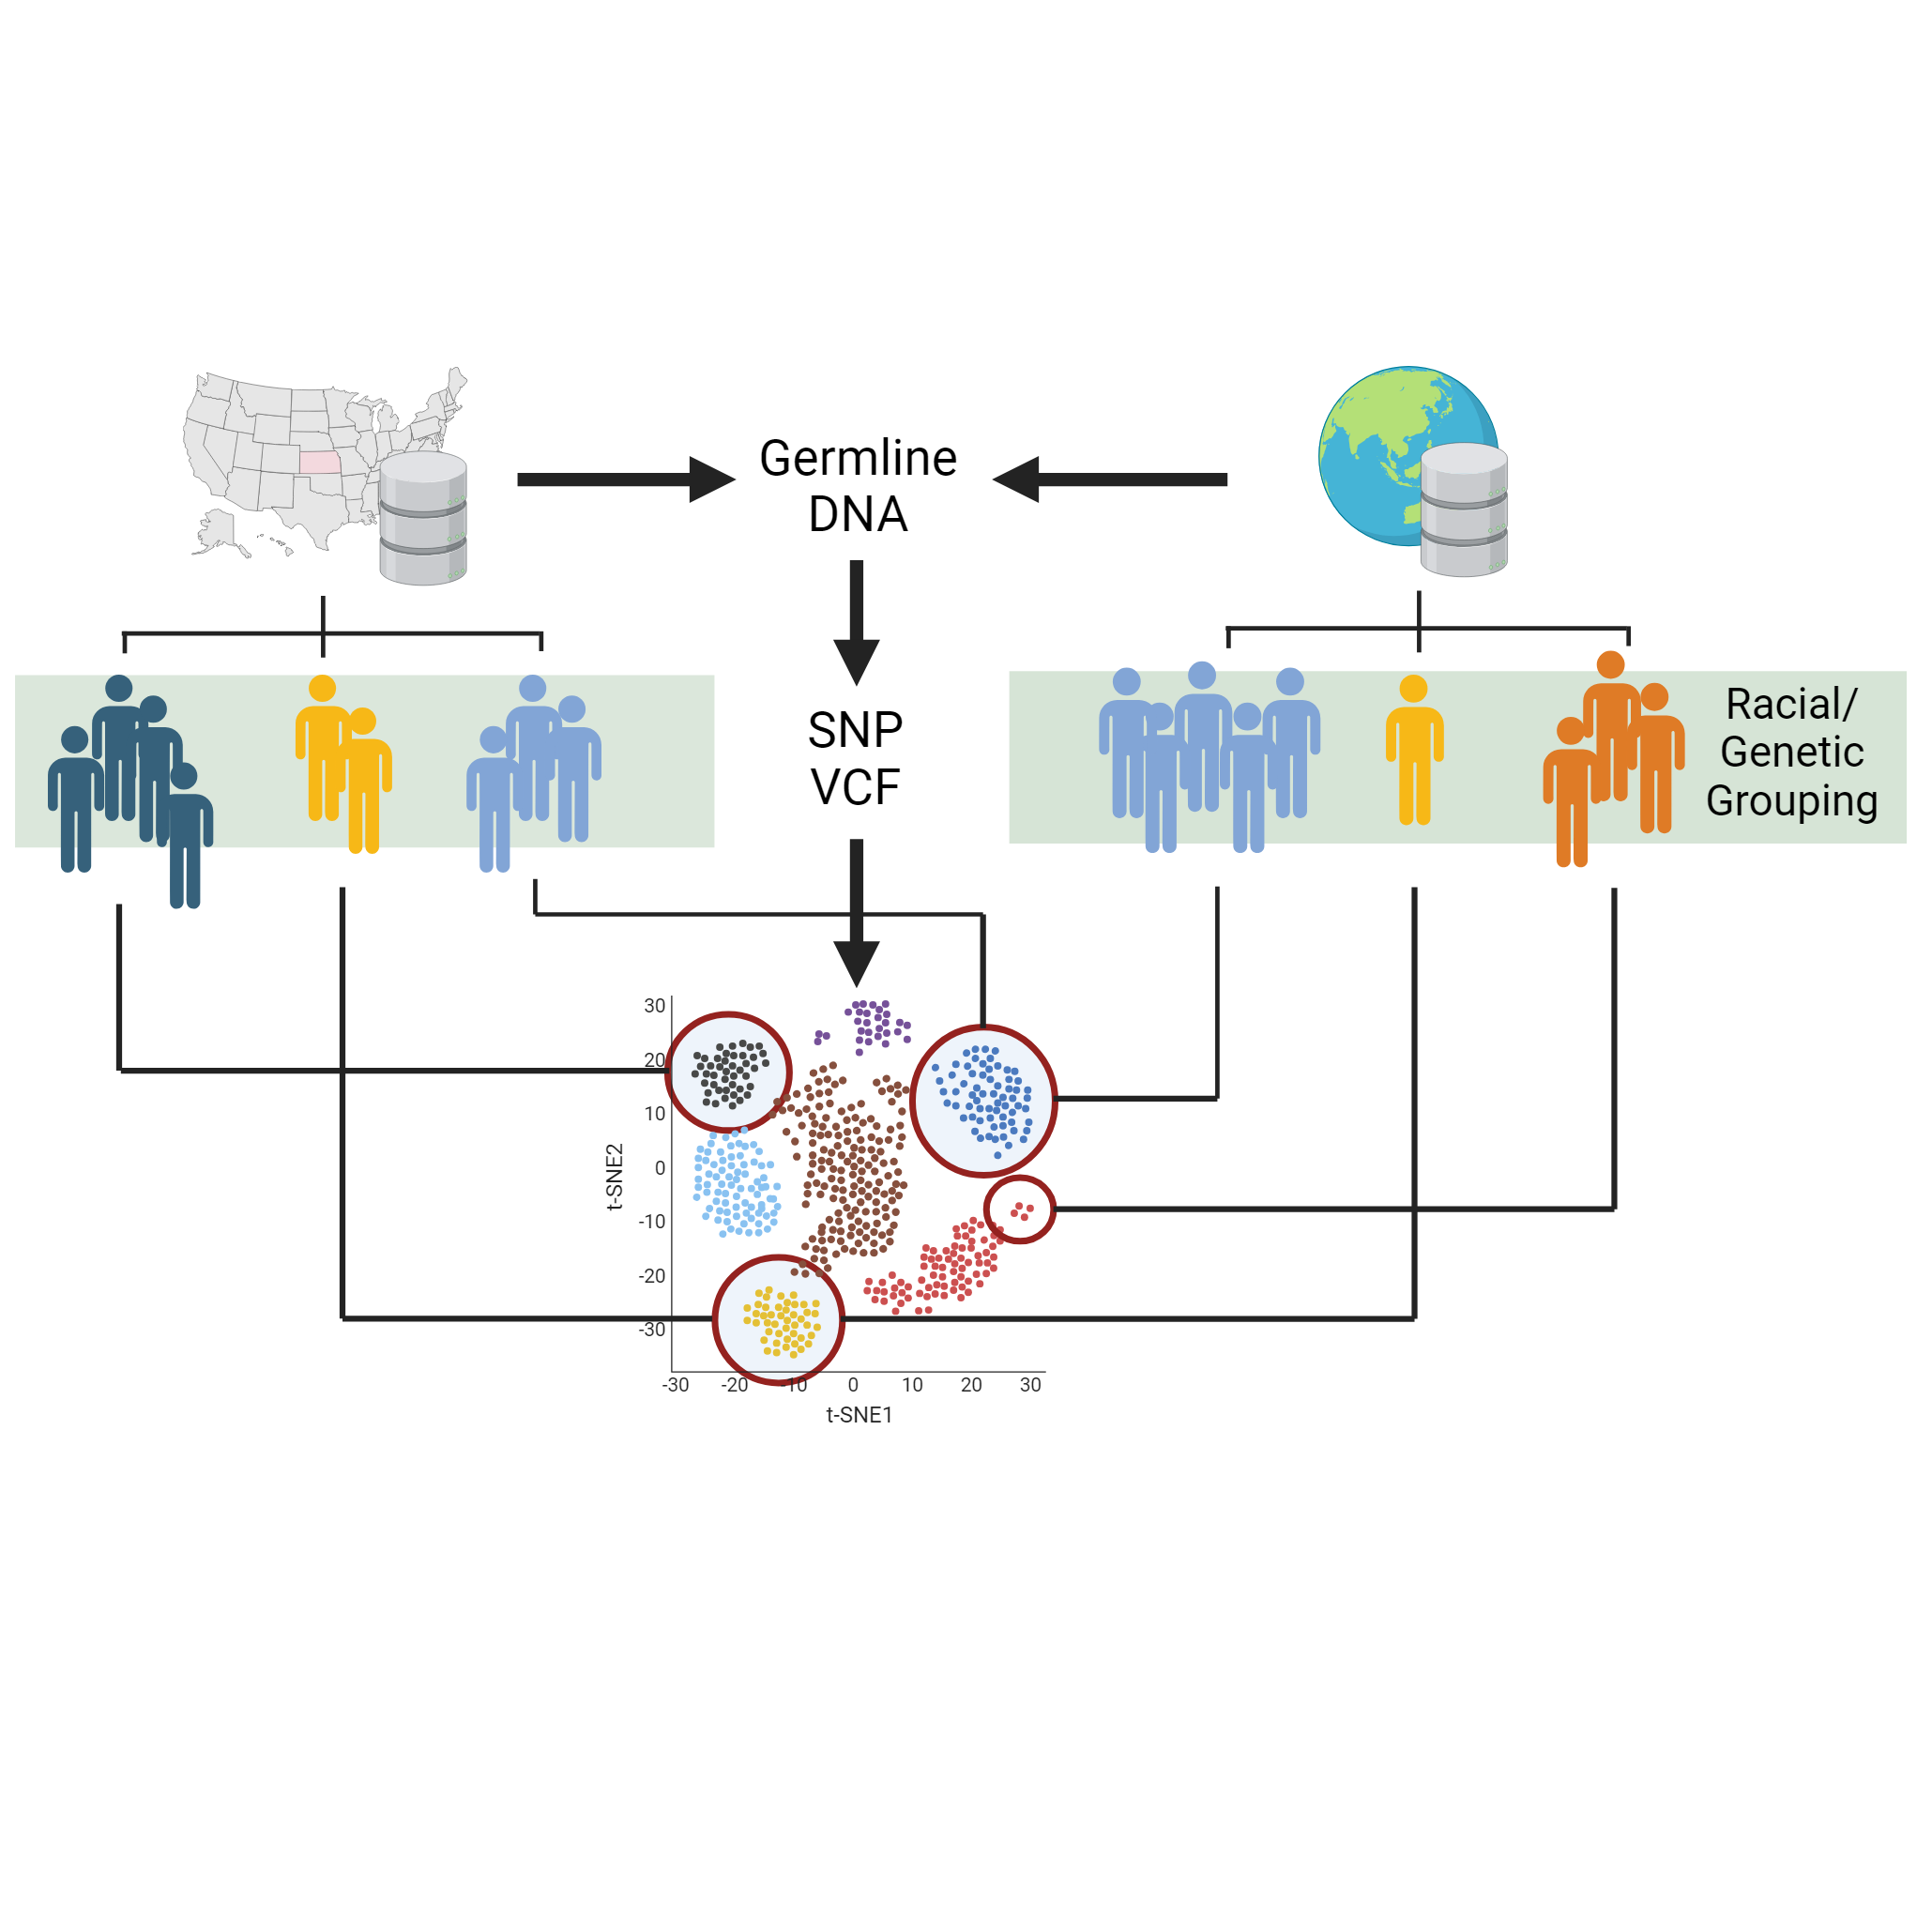 Exploring environmental effects on cancer progression through international sequencing data